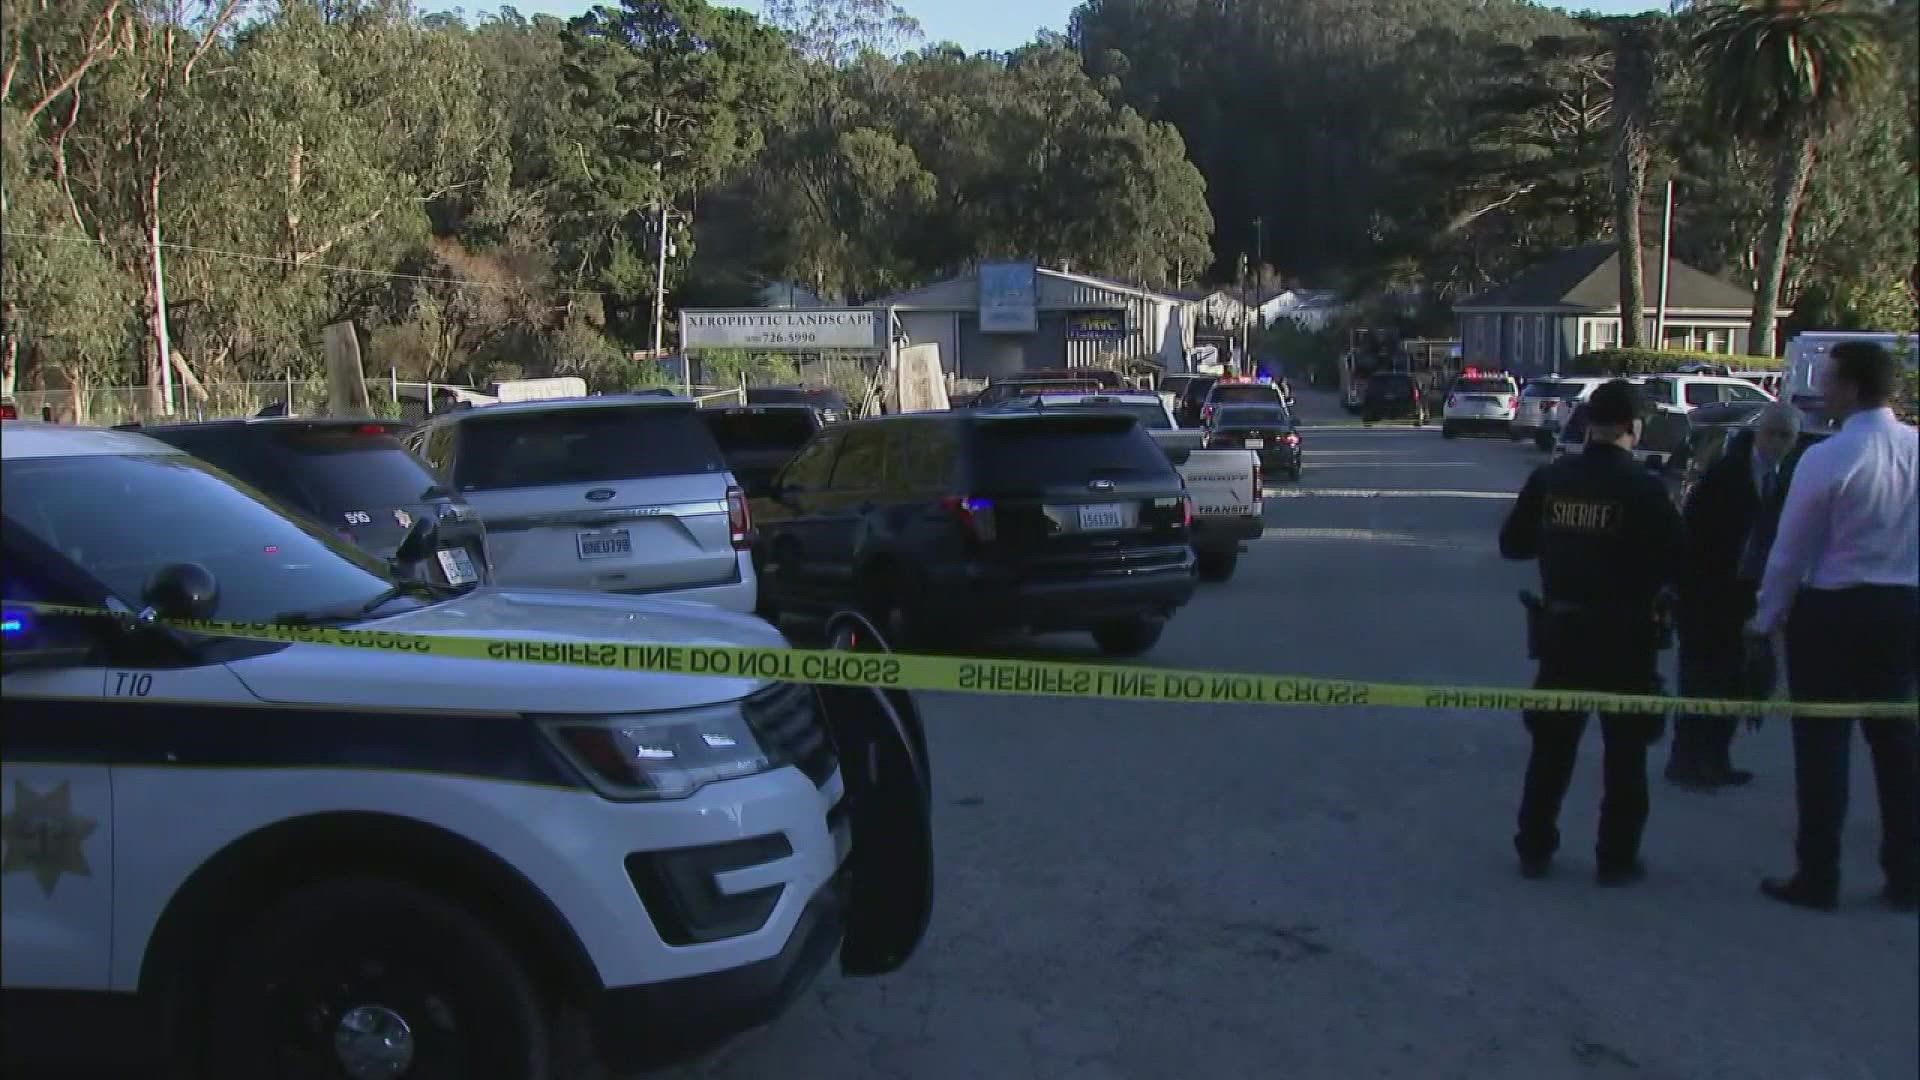 Seven people were killed in two related shootings Monday in a California coastal community south of San Francisco.